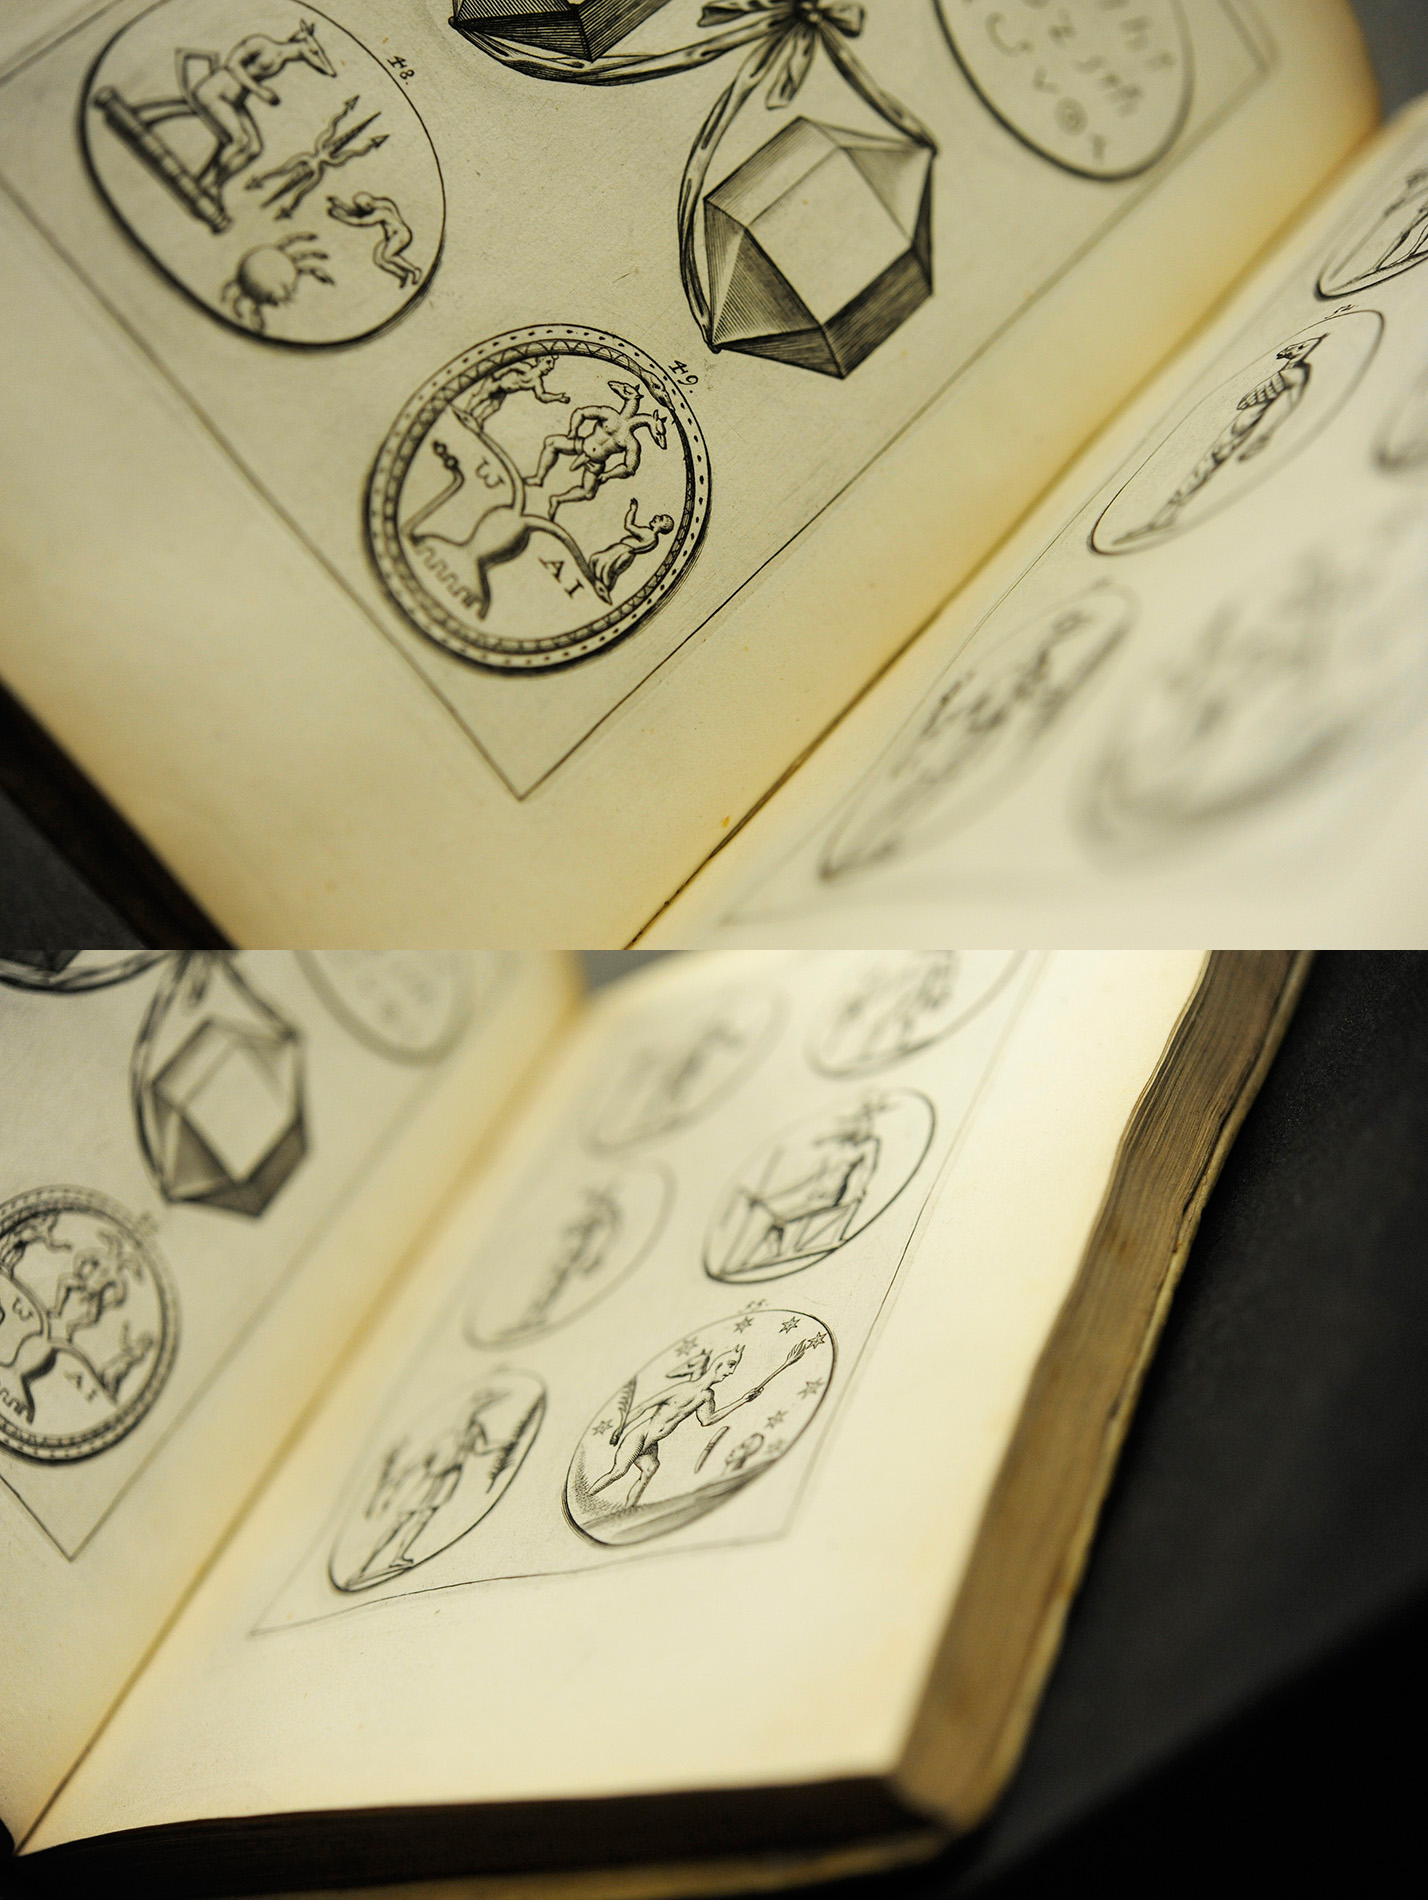 Arcane symbols from old mystic texts. One does wonder whether Donaldson dabbled in wizardry. (Don BF1561.M2C57).